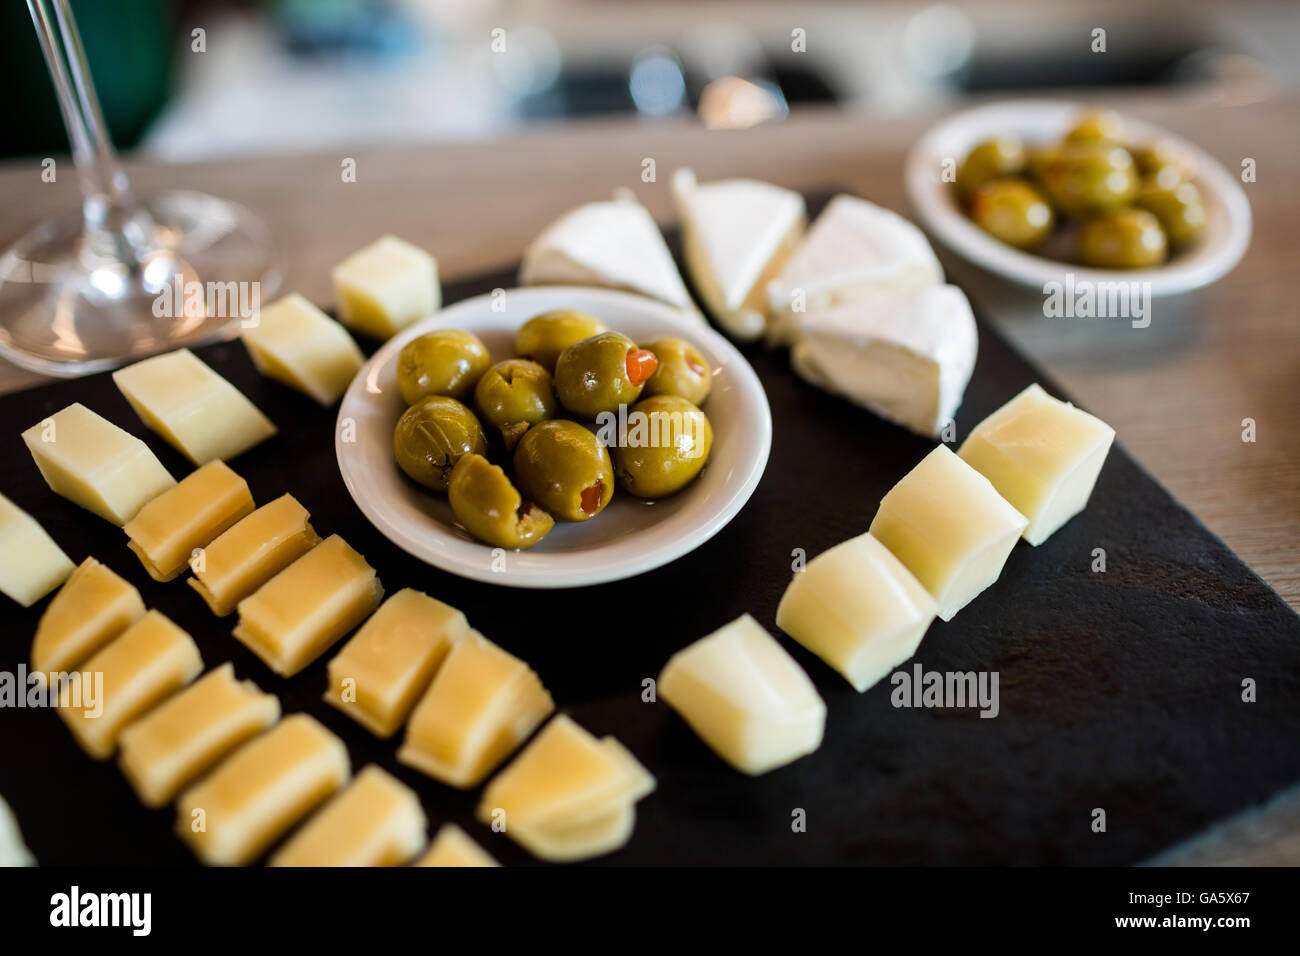 Cheese slices and olives on tray Stock Photo